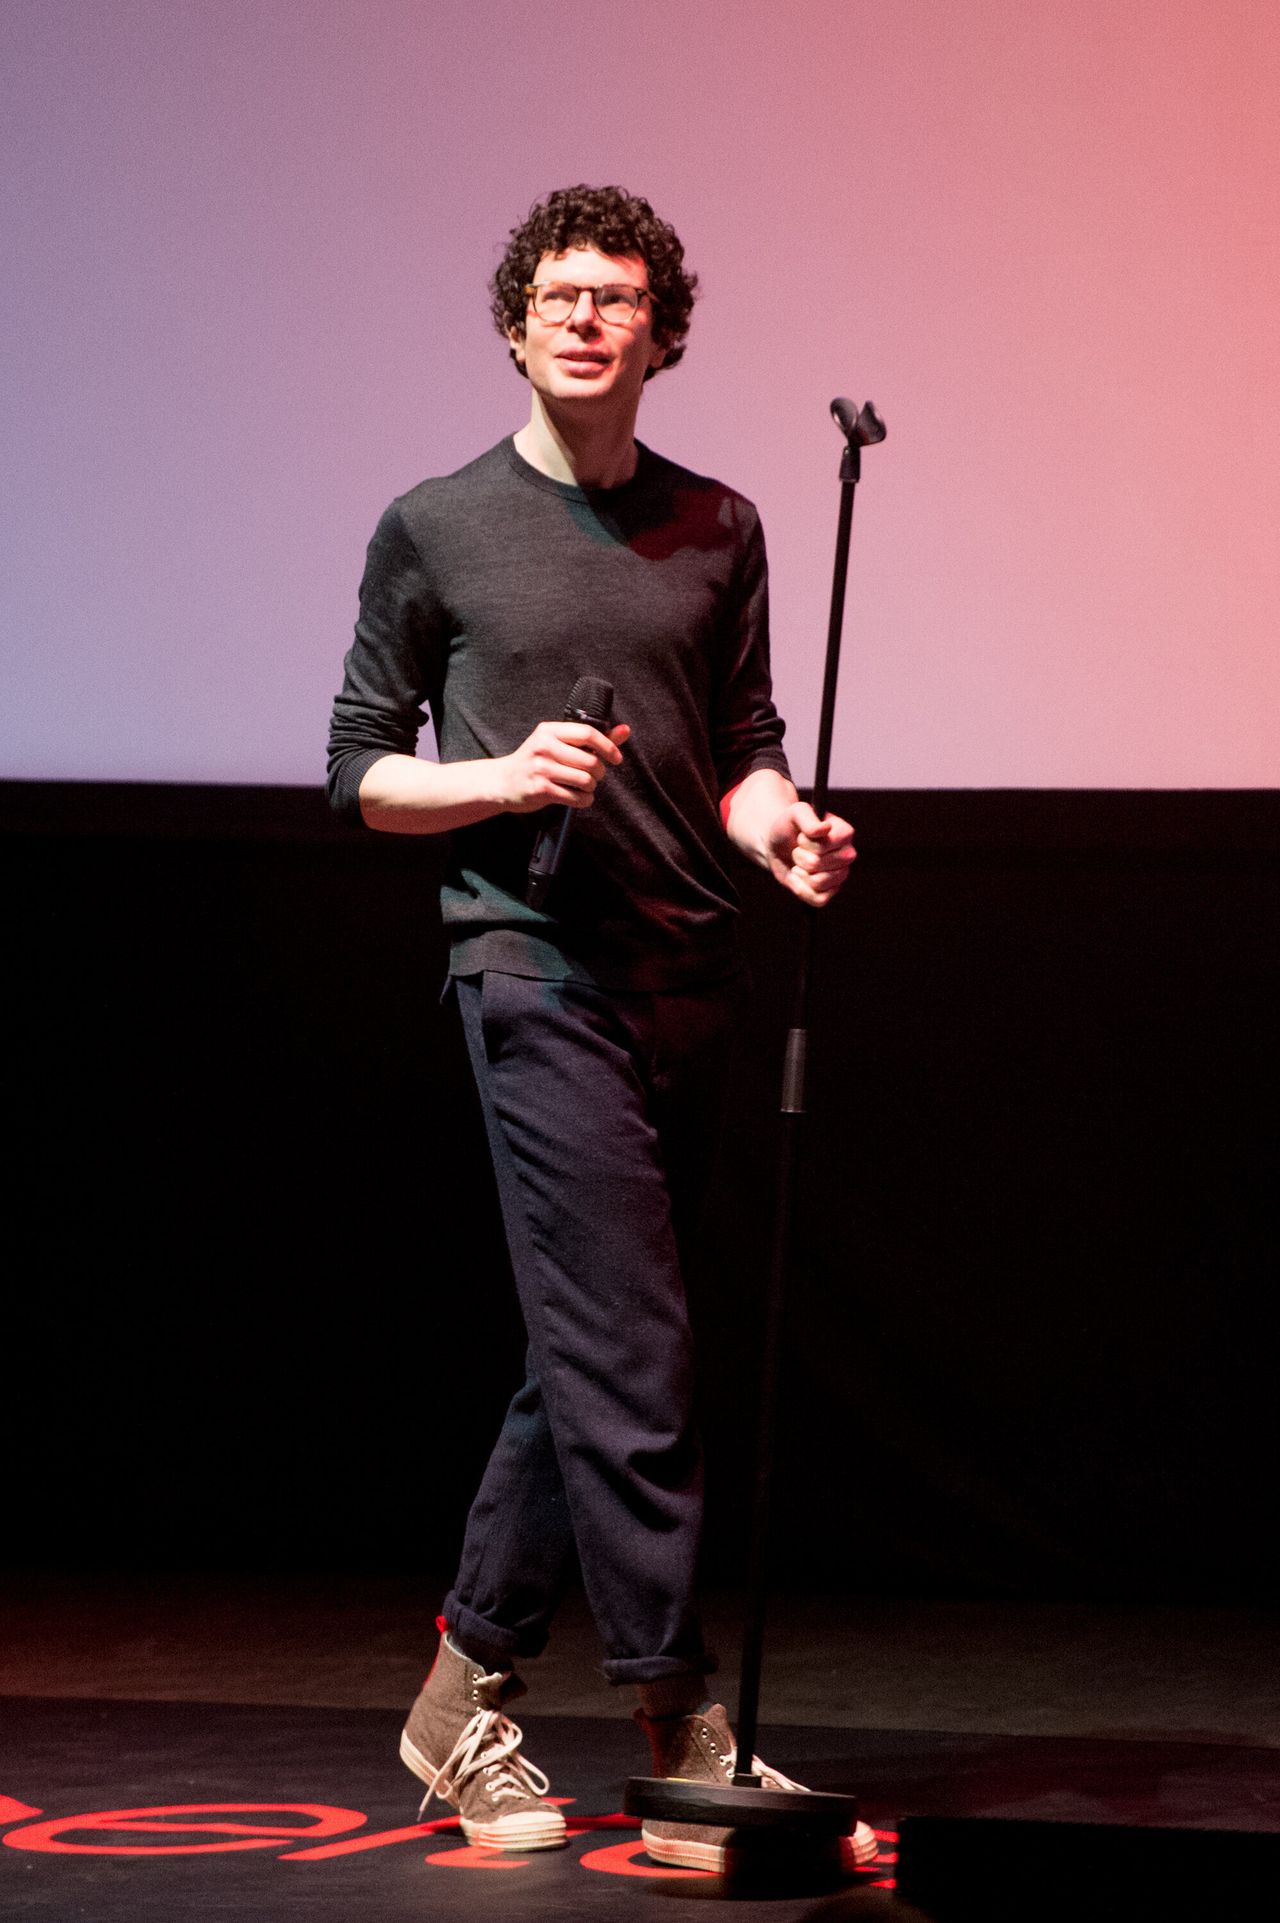 Simon performing at a Shelter charity event earlier this year